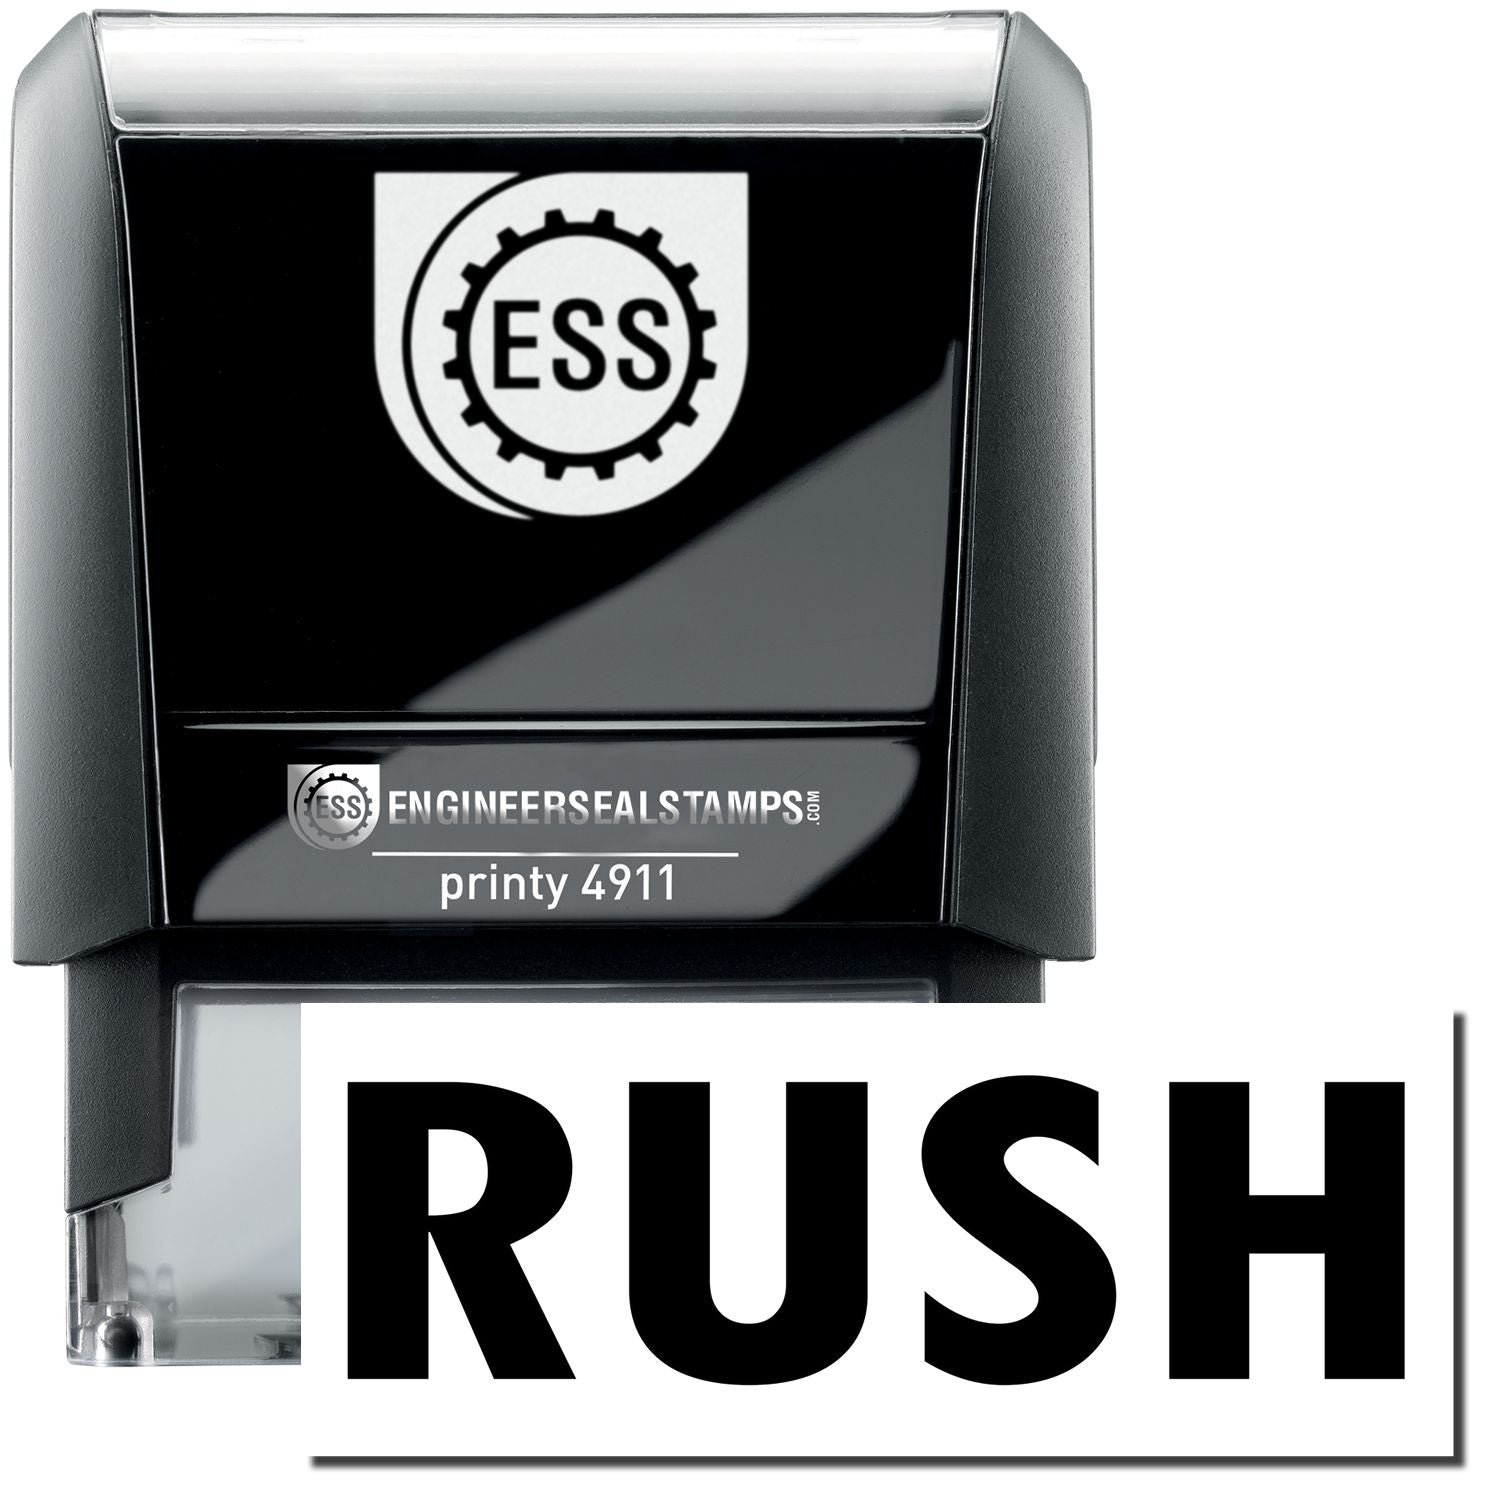 A self-inking stamp with a stamped image showing how the text "RUSH" is displayed after stamping.